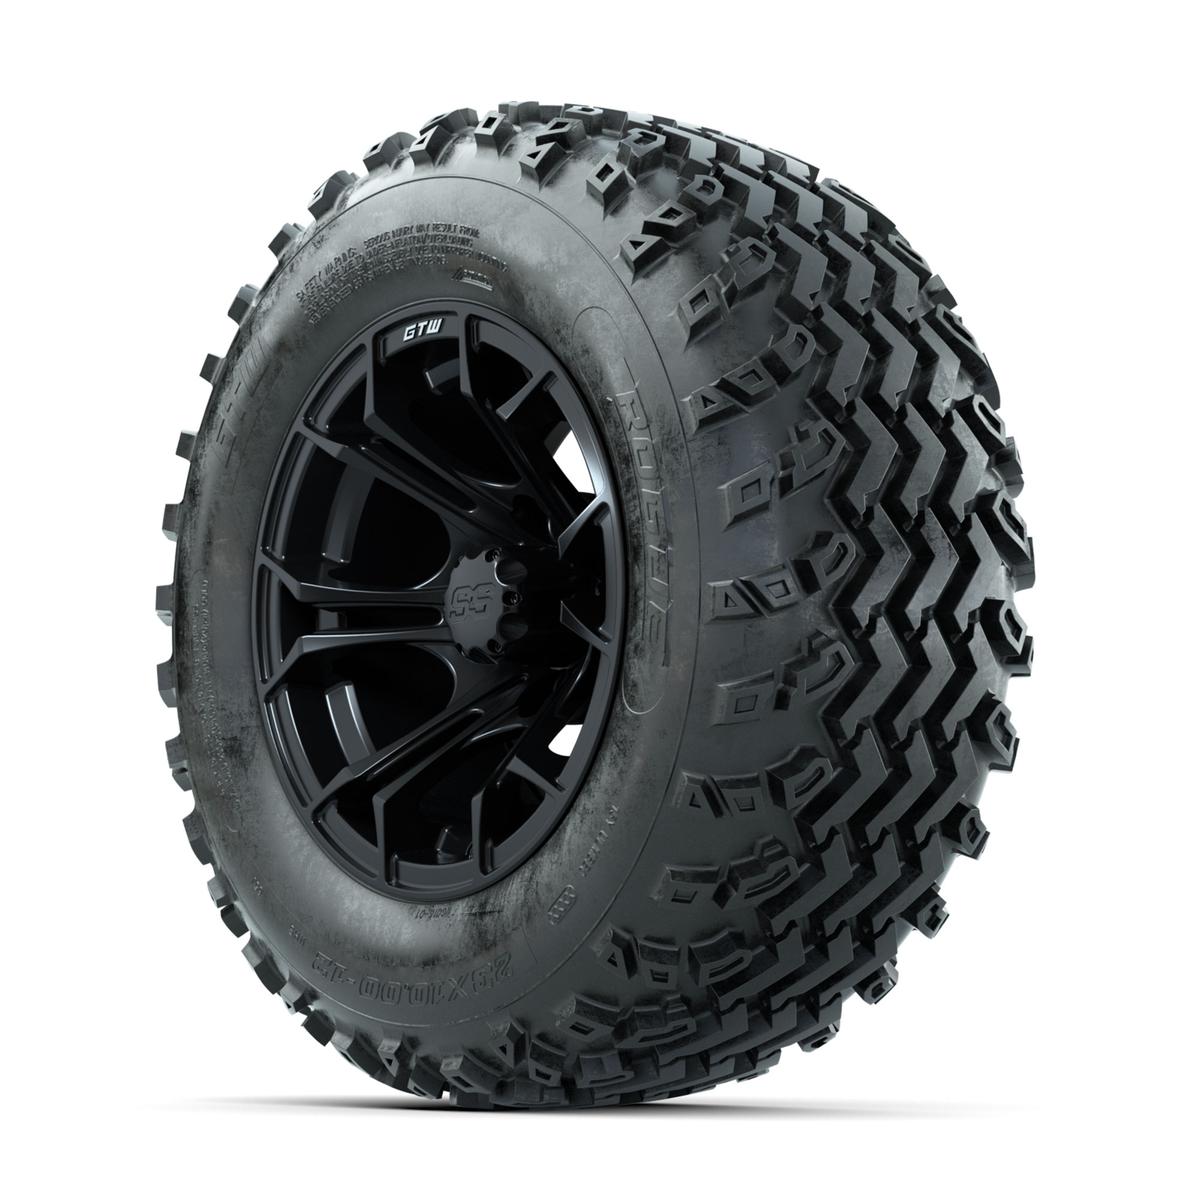 GTW Spyder Matte Black 12 in Wheels with 23x10.00-12 Rogue All Terrain Tires – Full Set